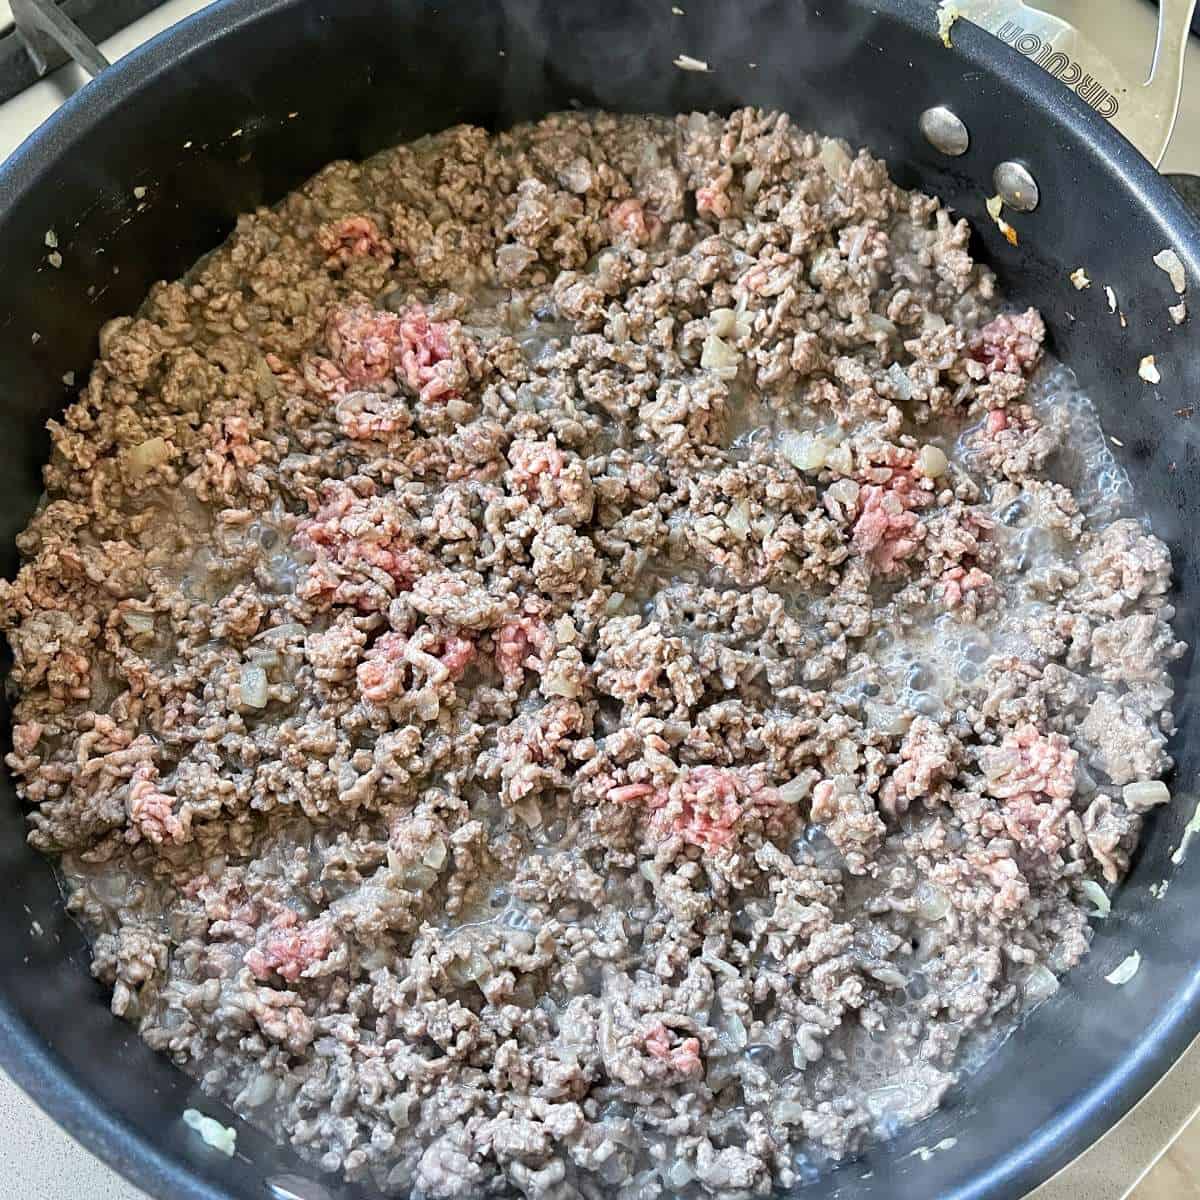 Mince cooking in a frypan